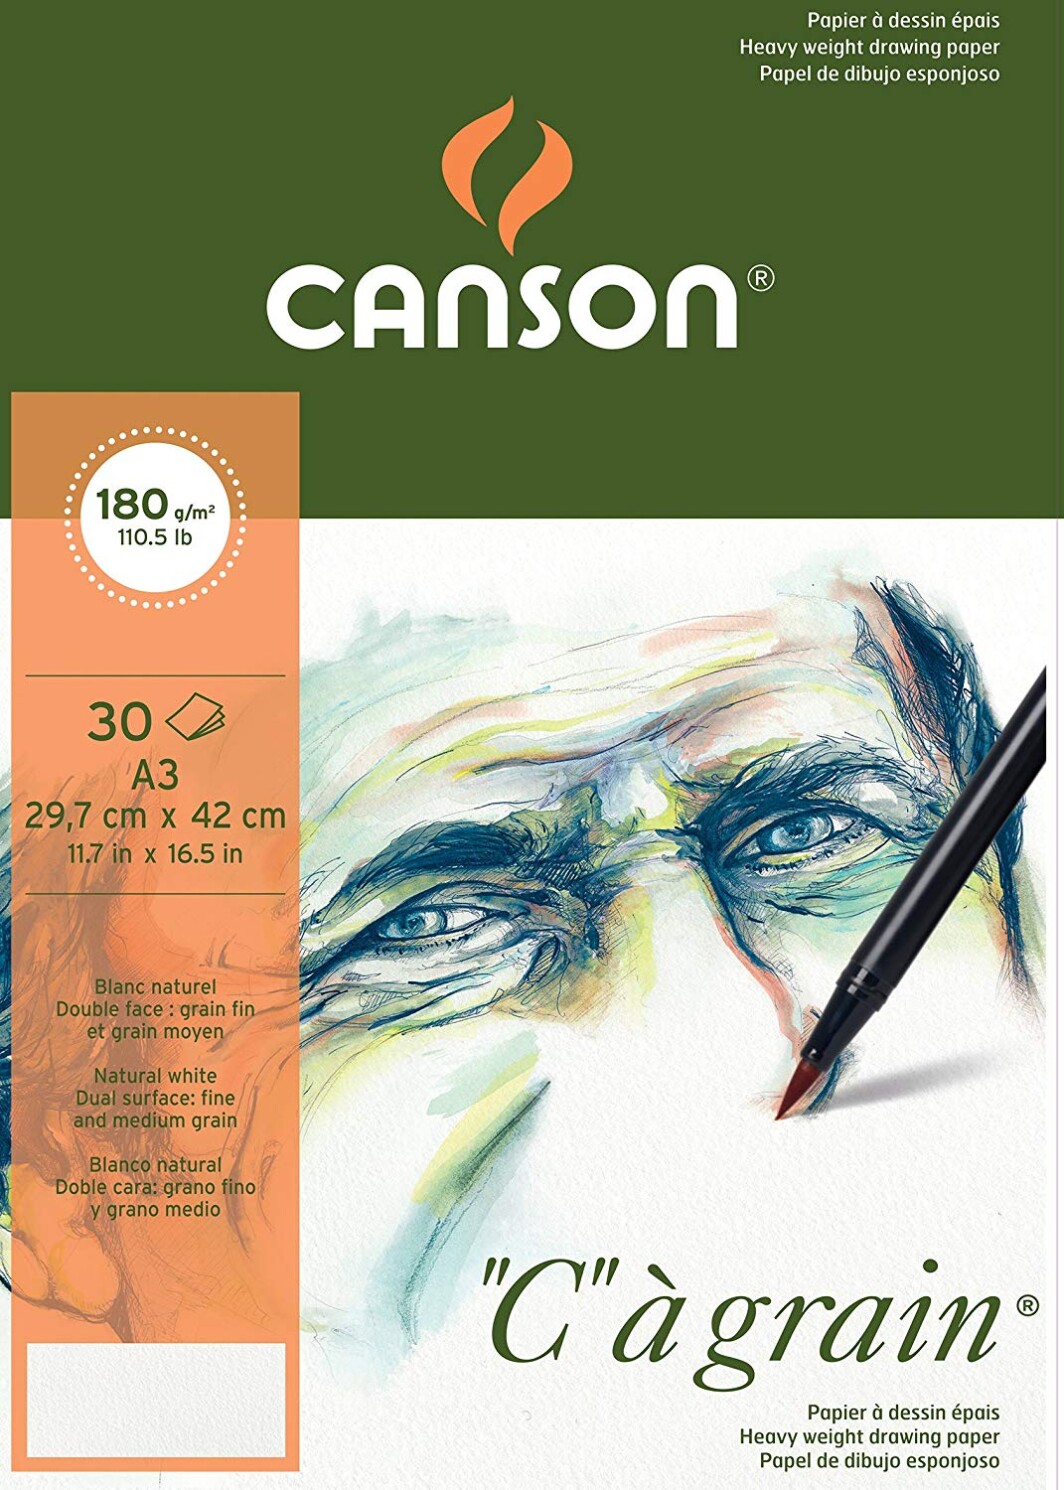 Canson C a Grain 180gsm Heavyweight drawing paper, fine grain texture, A3 pad including 30 sheets 29.7 x 42 cm-0